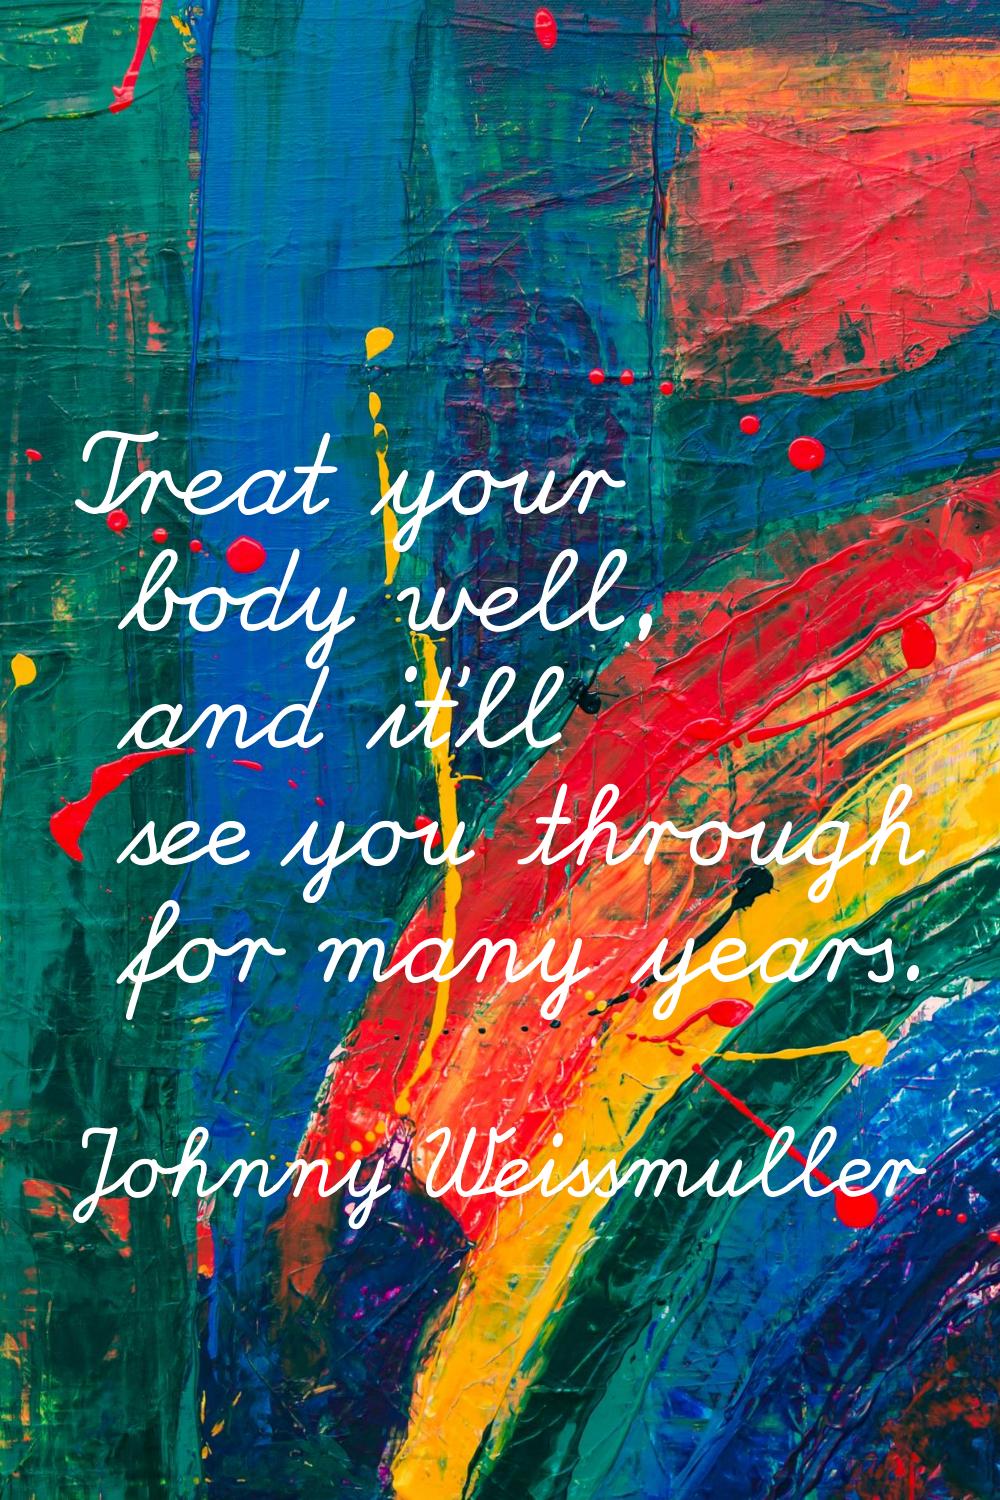 Treat your body well, and it'll see you through for many years.